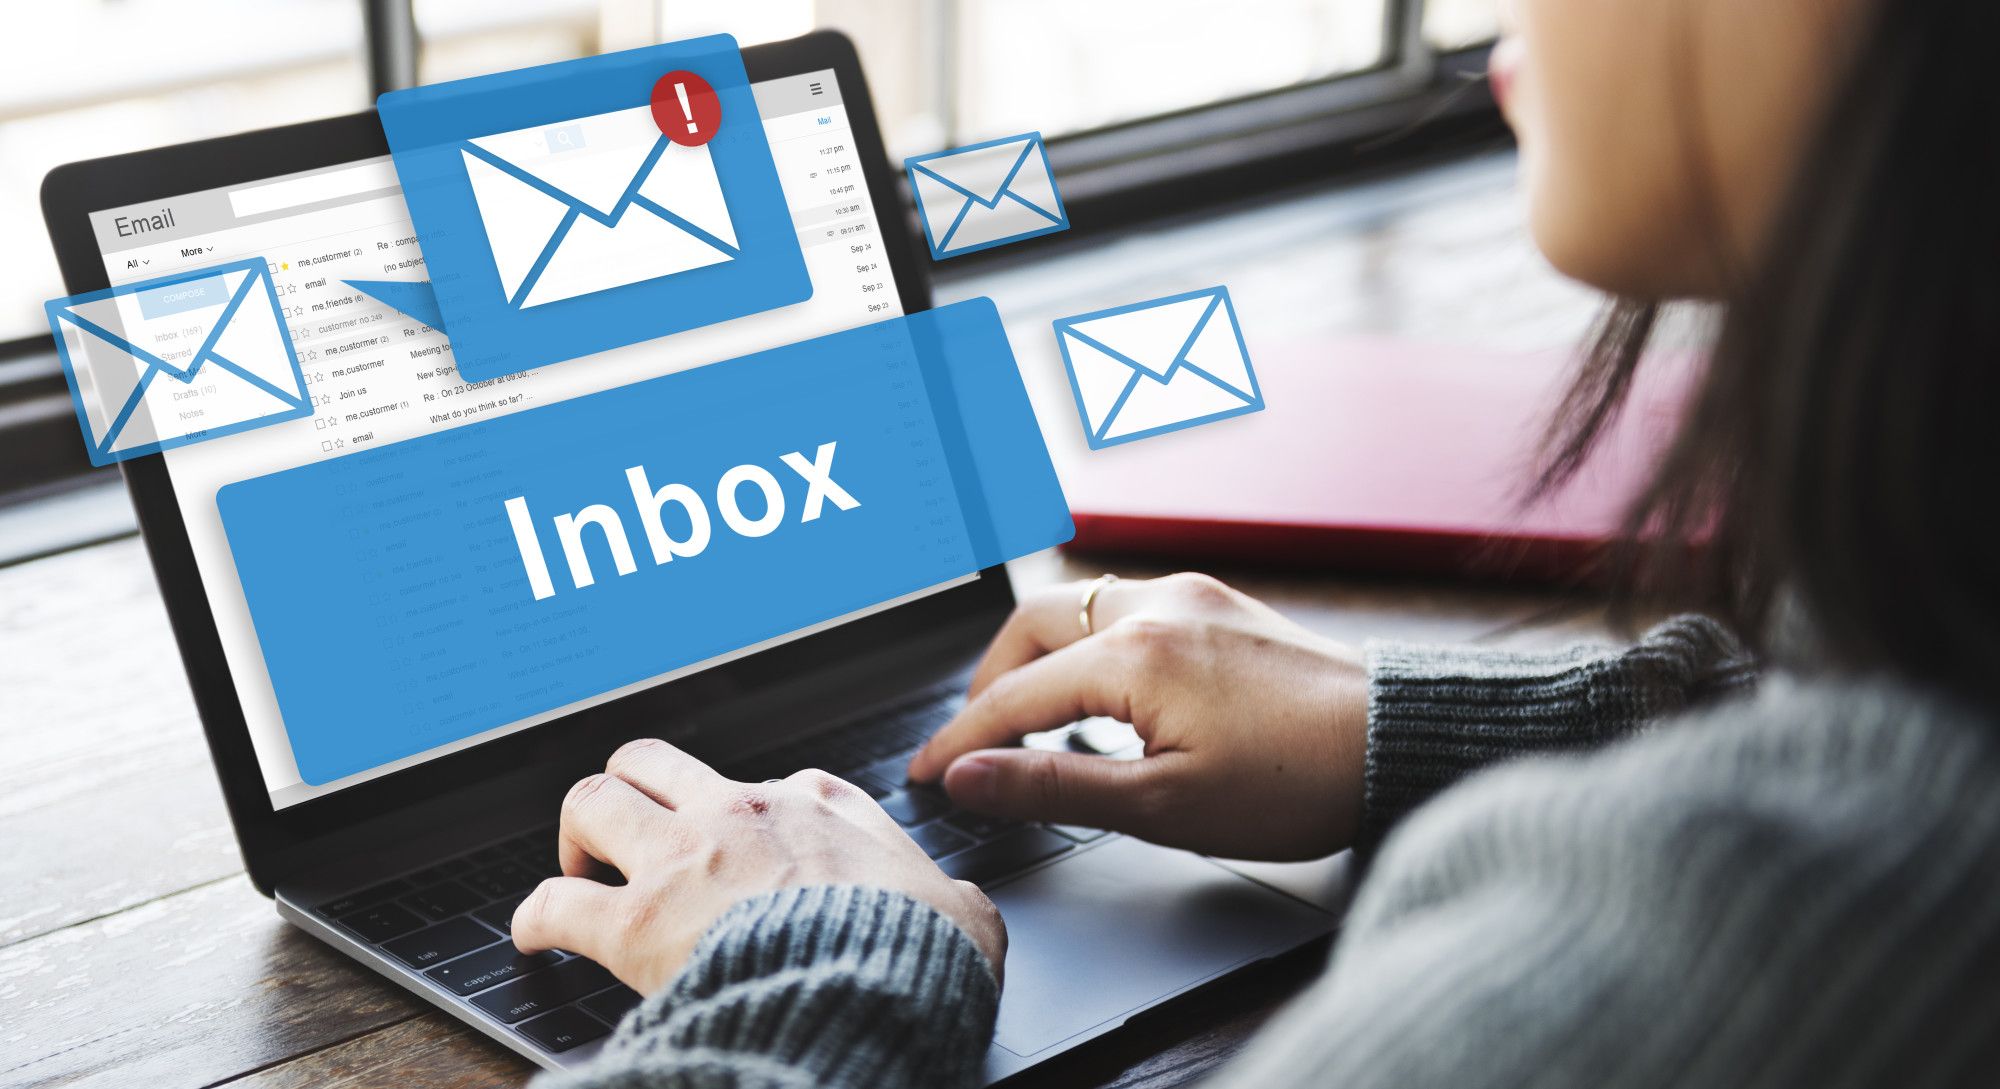 The Ultimate Email Clean-up Guide: How to Reduce Your Inbox